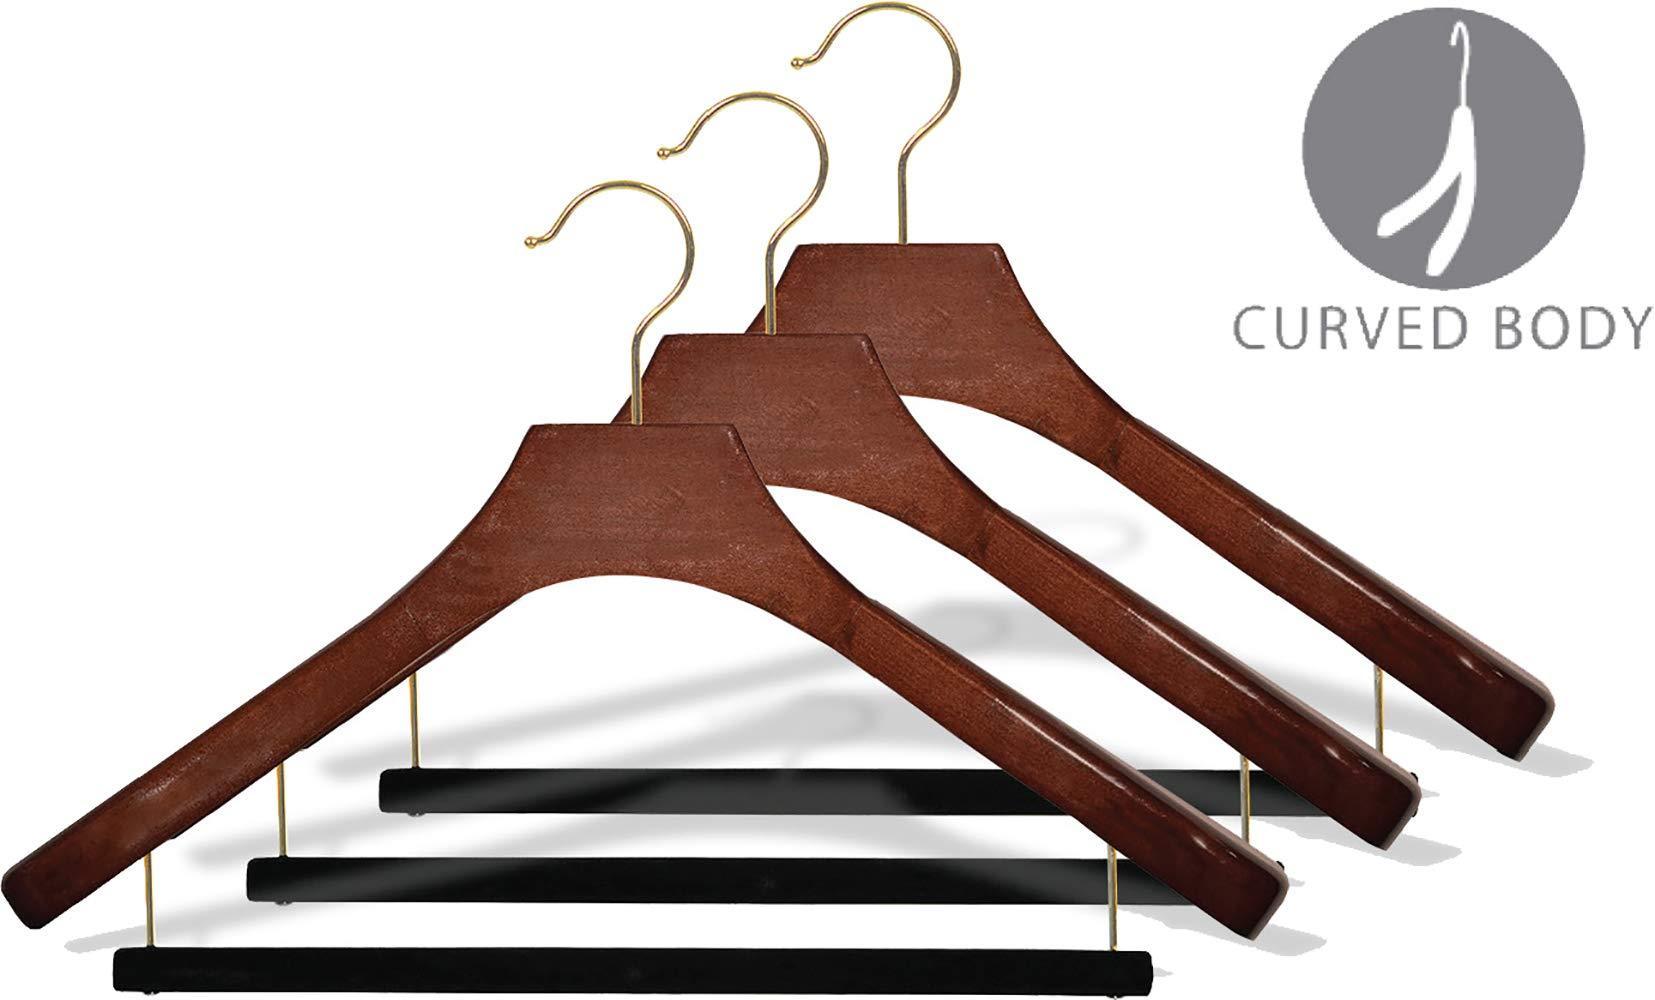 Discover the best deluxe wooden suit hanger with velvet bar walnut finish brass swivel hook large 2 inch wide contoured coat jacket hangers set of 12 by the great american hanger company